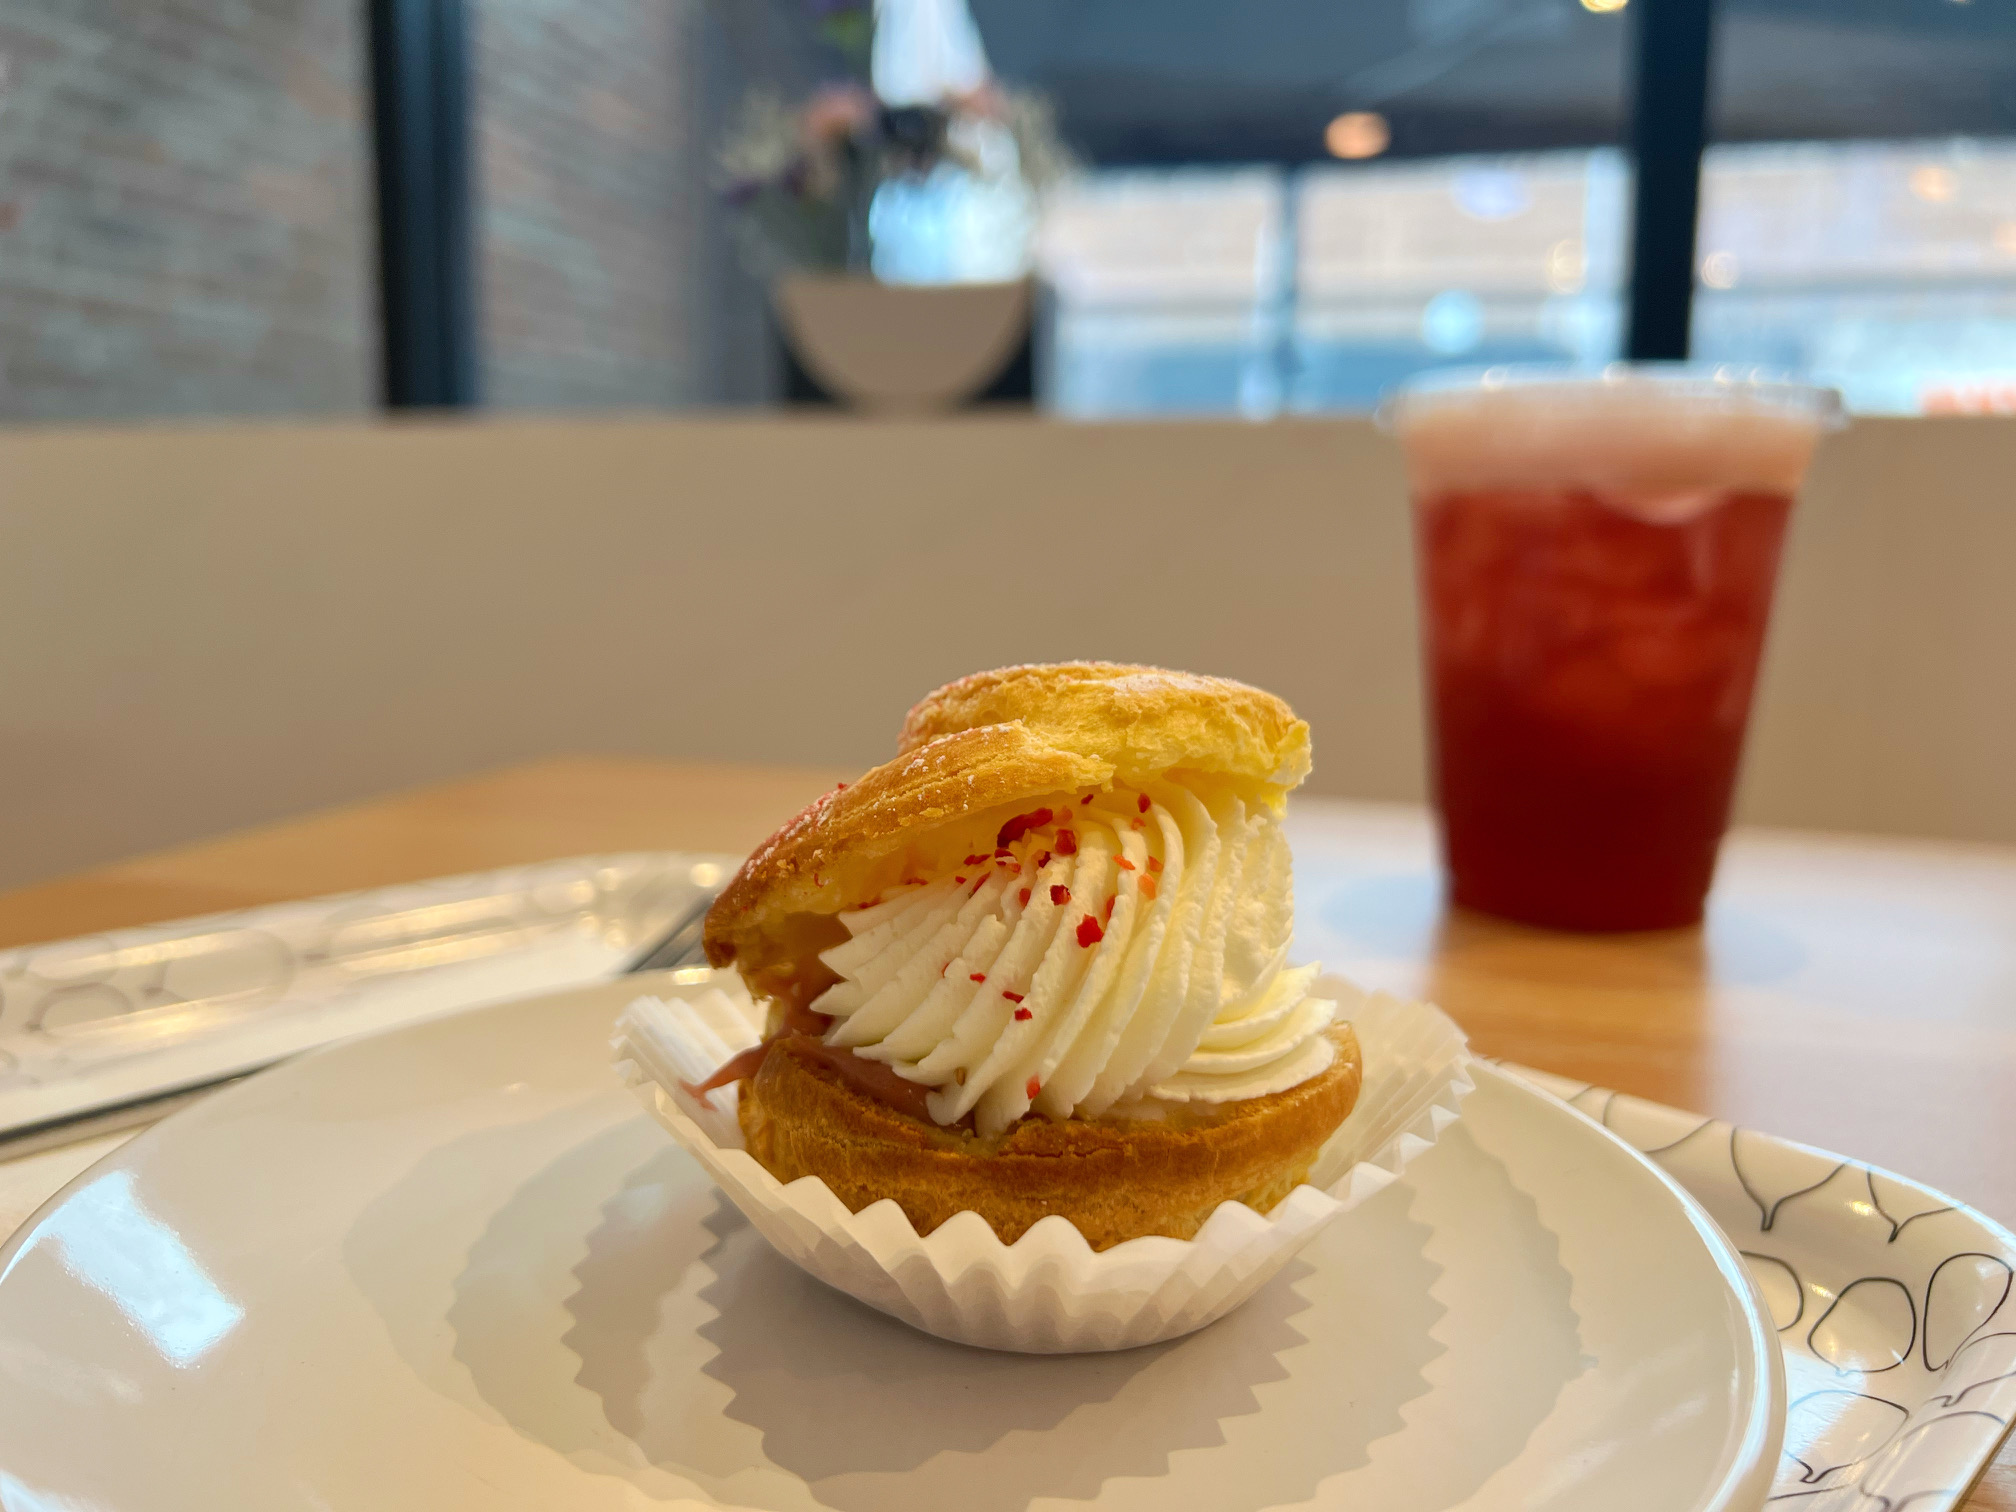 On a white plate on a graphic gray tray, there is a strawberry shu cream sweet from Suzu's: a Japanese Bakery. Photo by Alyssa Buckley.